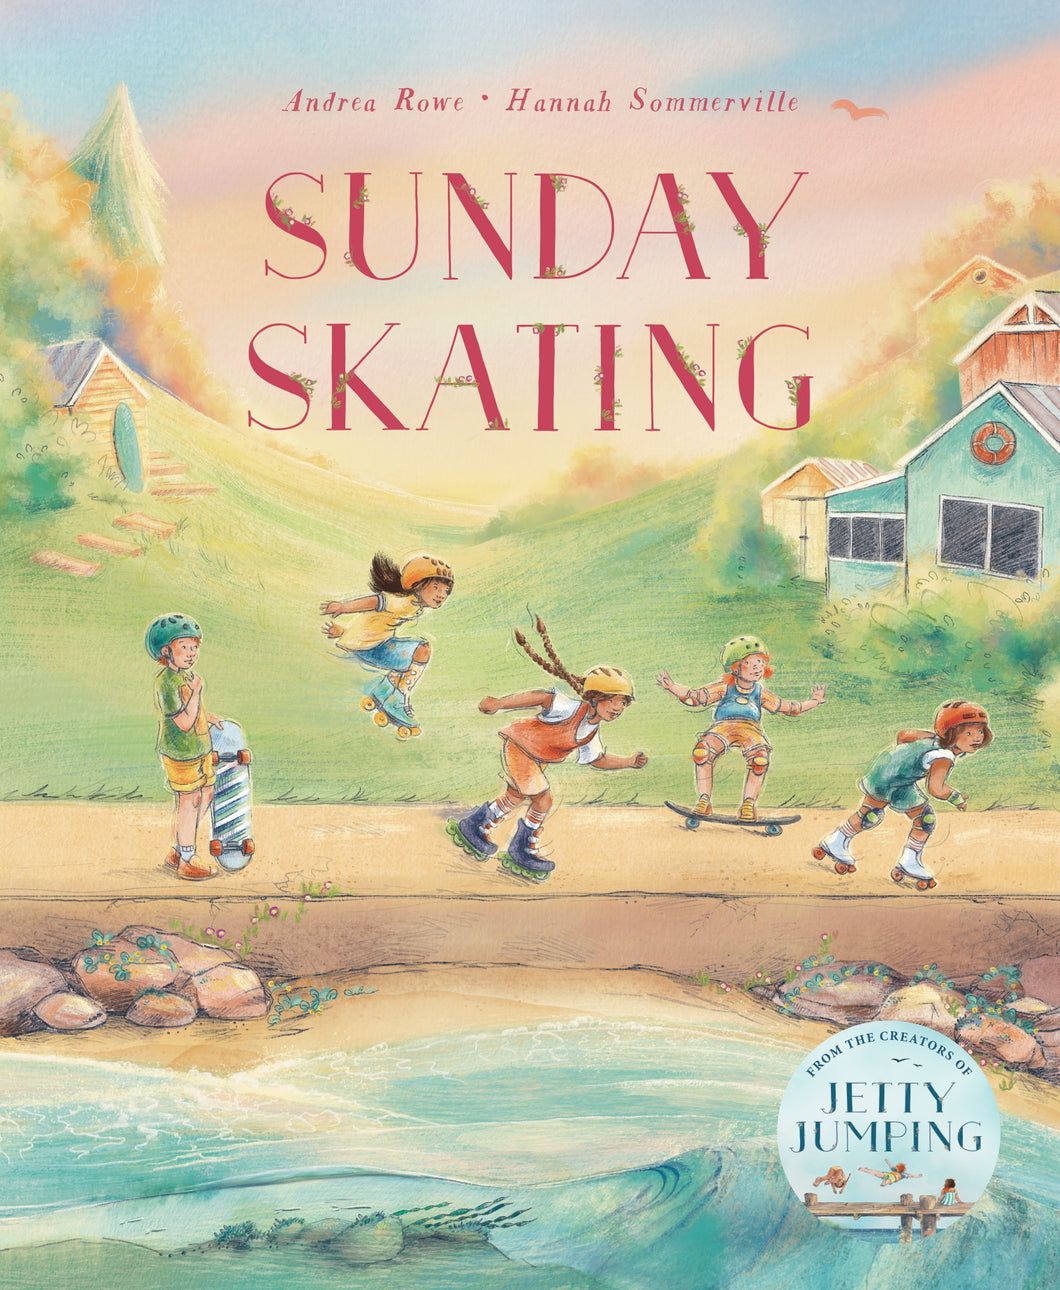 Sunday Skating by Andrea Rowe and Hannah Sommerville